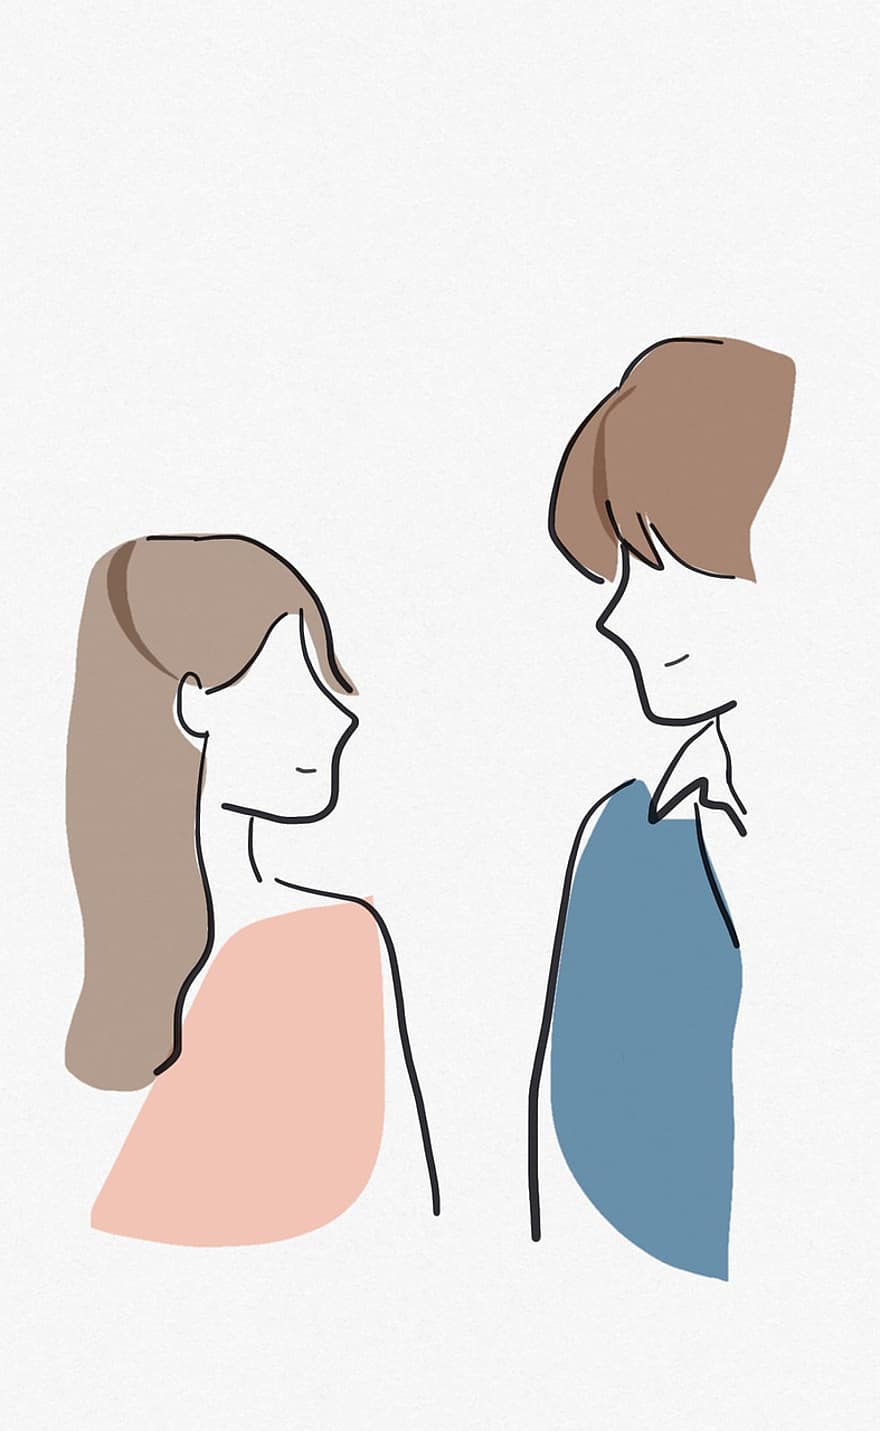 Couple, Man And Woman, Male And Female, Relationship, Lovers, People, women, illustration, vector, cartoon, men